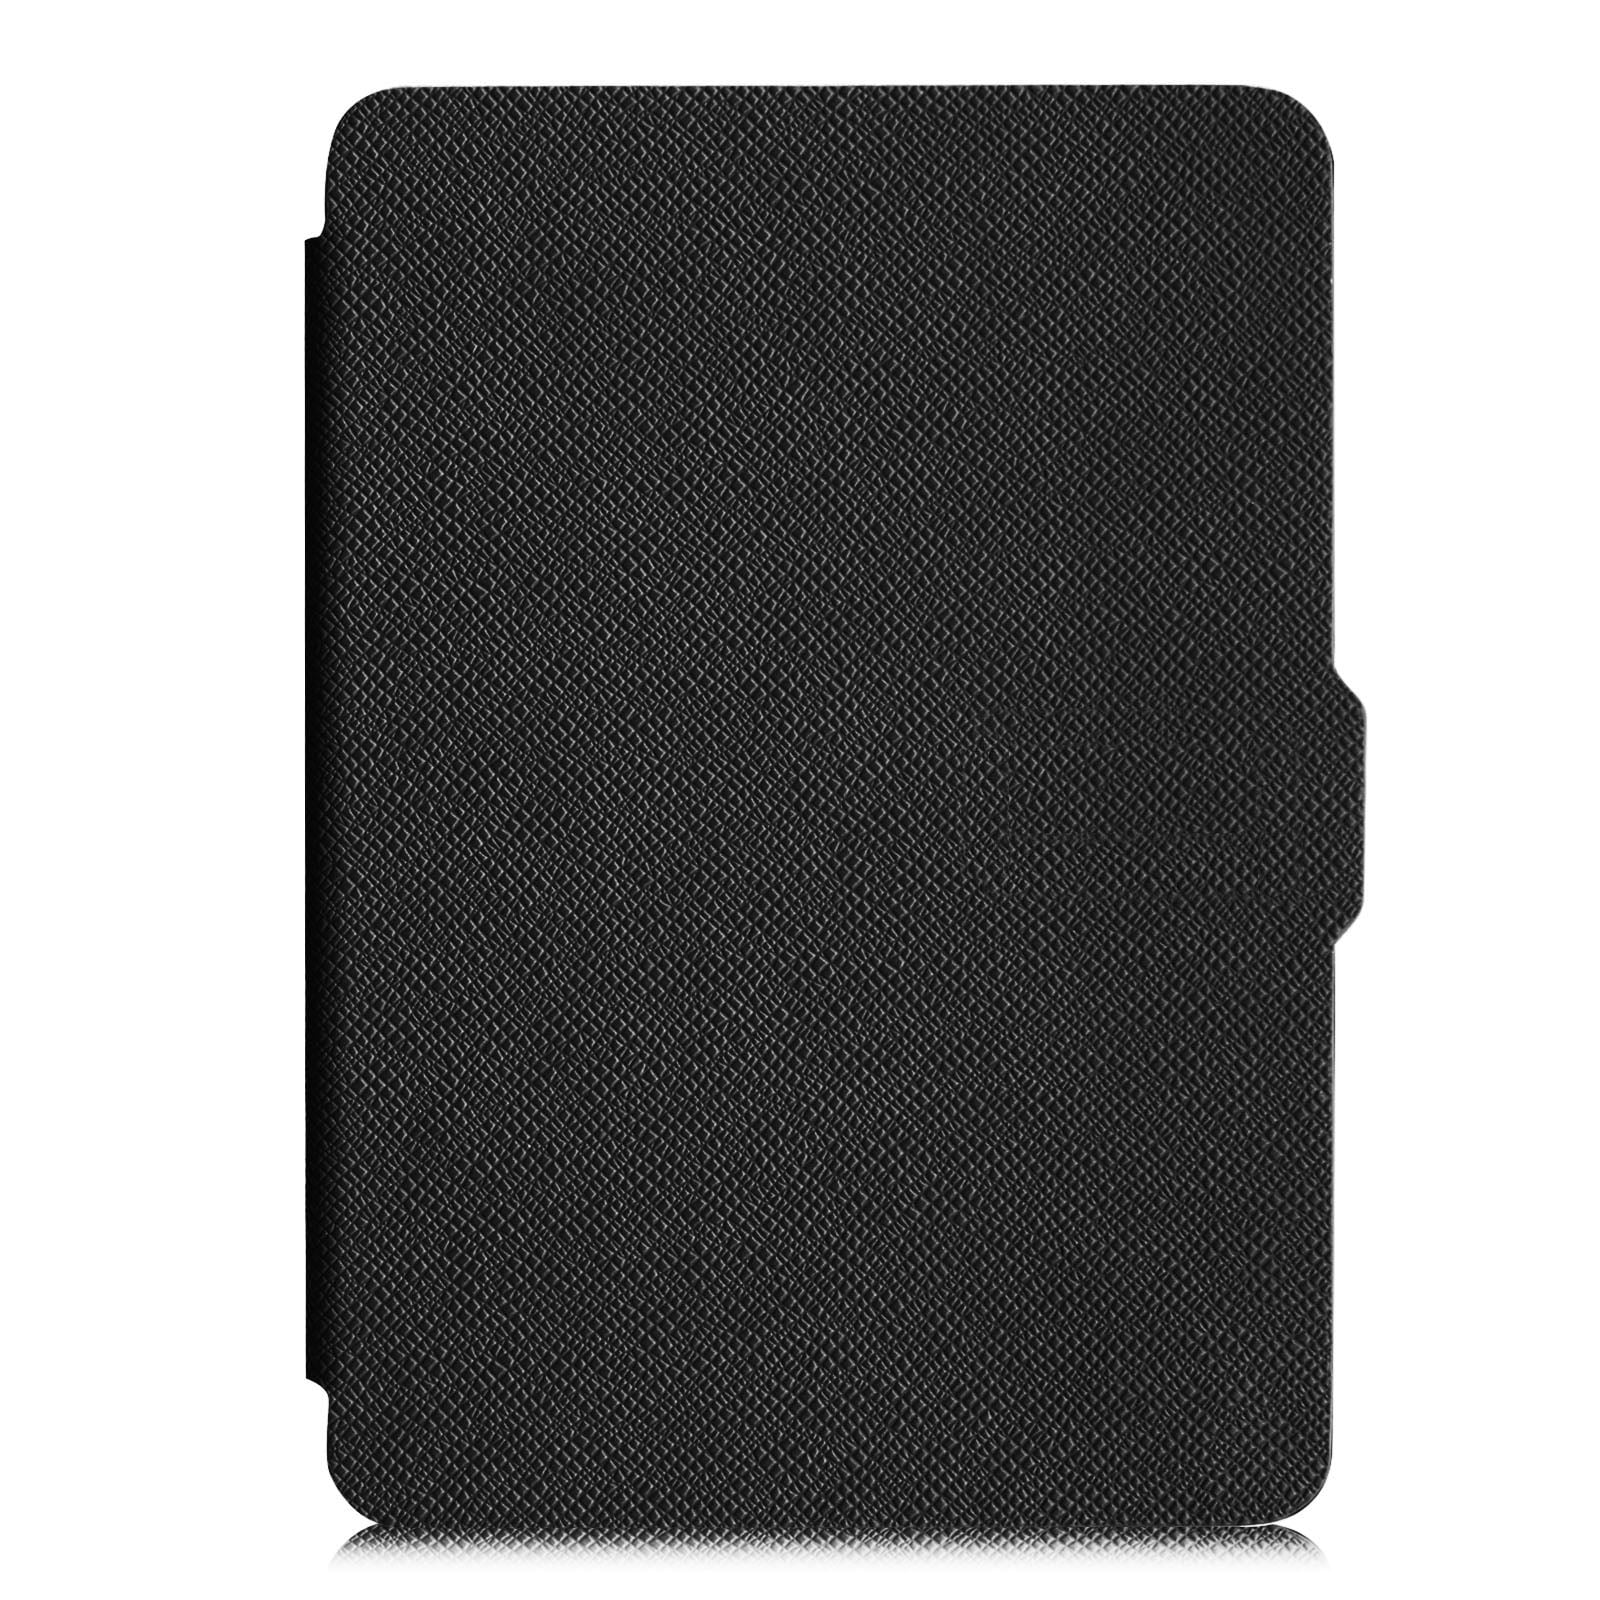 Fits All-New 10th Generation 2018 / All Paperwhite Generations Blossom - Premium PU Leather Protective Sleeve Cover with Card Slot and Hand Strap Fintie Stand Case for Kindle Paperwhite